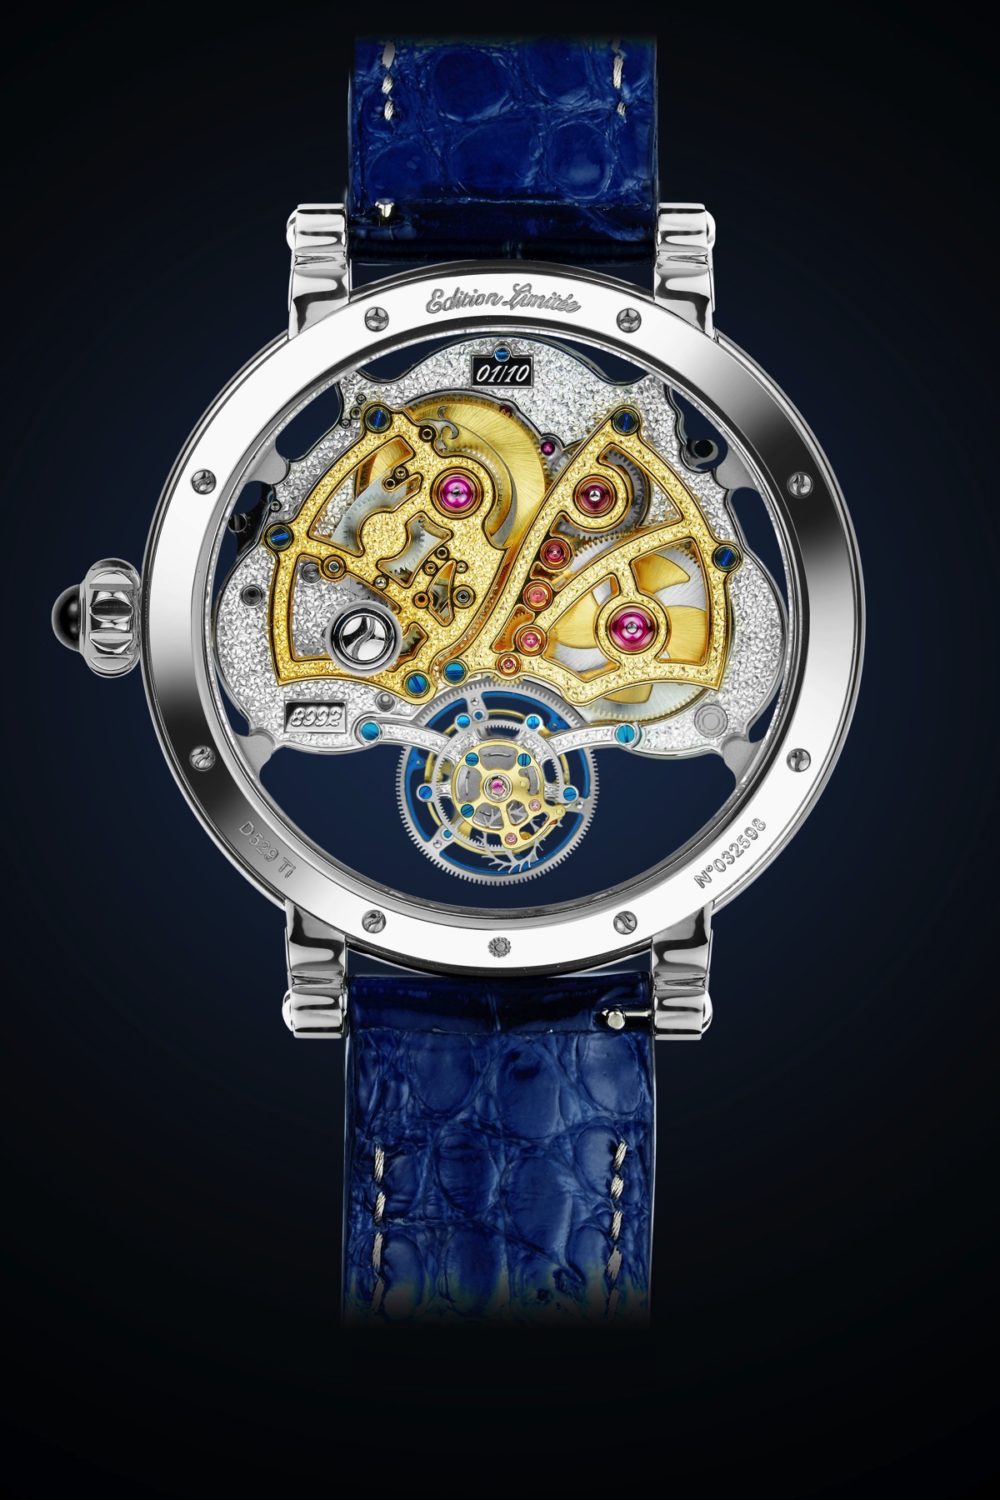 Bovet Récital 26 Brainstorm Chapter Two showcases new display mechanisms